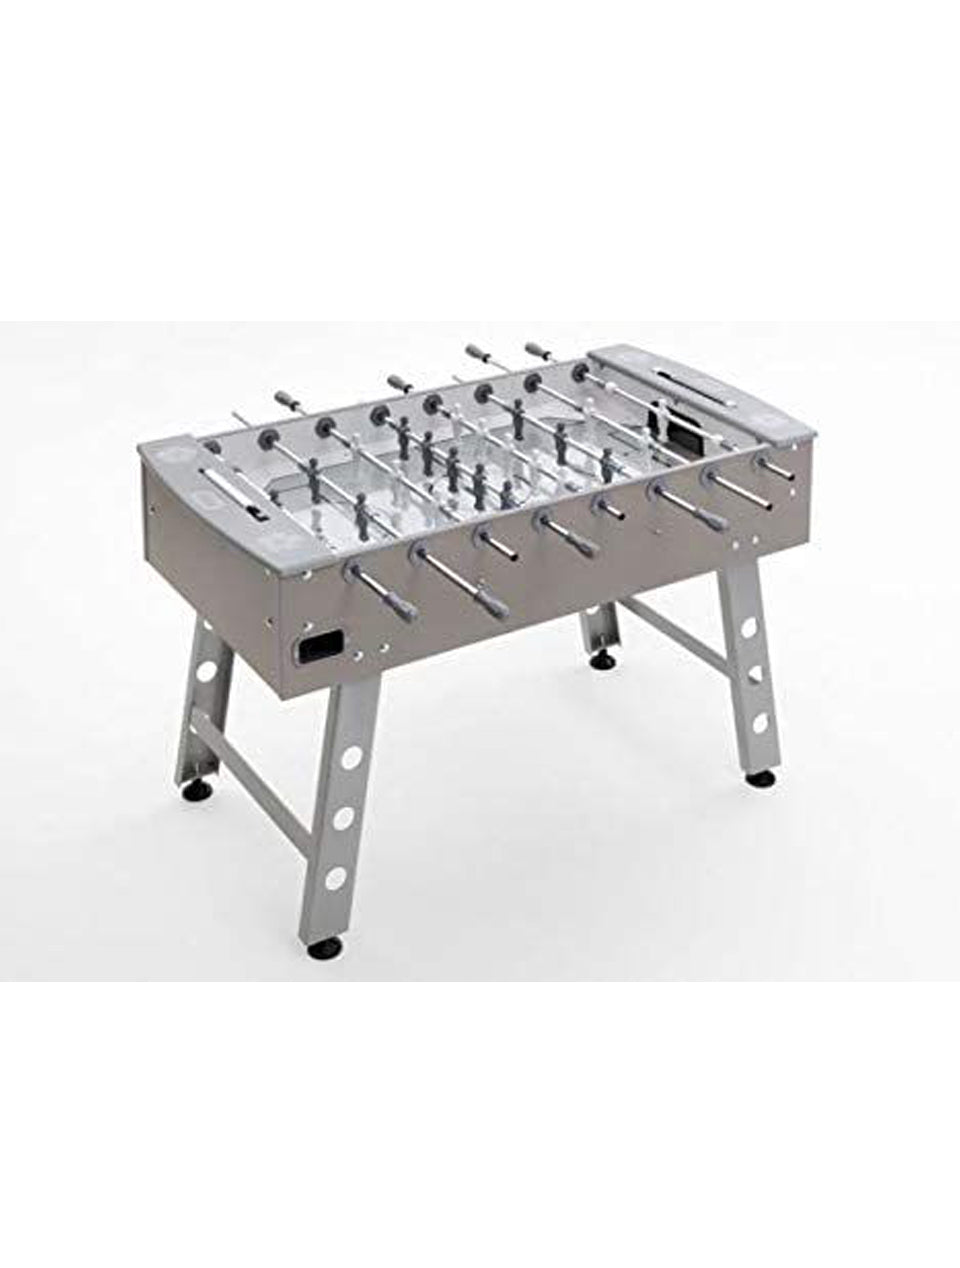 FAS Glame Football Table Grey/White Players - 0CAL0114